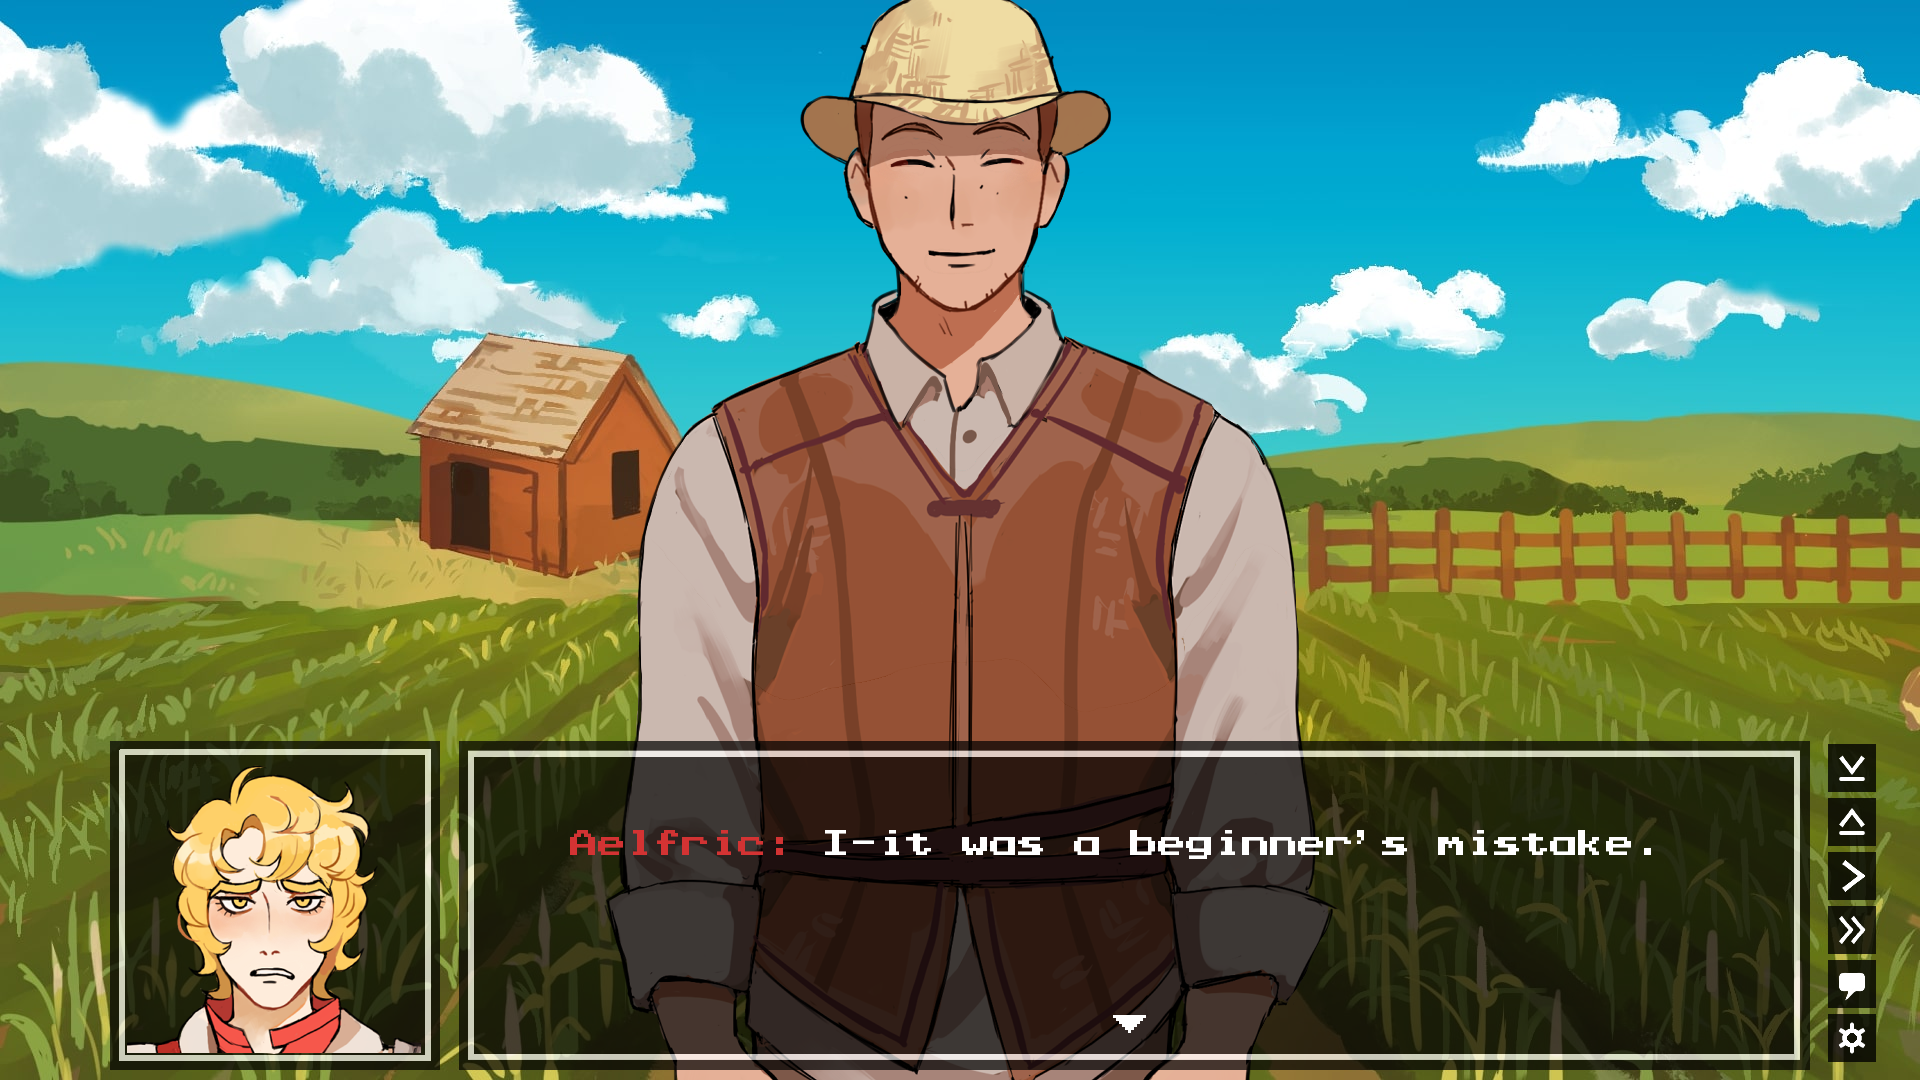 A screenshot from the video game "Aelfric the Wondrous" by LadyMeowsith. A rectangular textbox on the bottom of the screen to place character dialogue and narration, and to the left of the textbox a square character portrait that is meant to show the playable character's facial expressions to the player. The textbox reads "Aelfric: I-it was a beginner's mistake." with pixelated font, red text for Aelfric's name and white text for the dialogue. Aelfric, the speaker and playable character, is the character in the portrait on the left, his face flushed and mouth downturned with embarrassment. The character in the center of the screen, Conrad, is smiling with his eyes closed, wearing a straw hat, and sturdy brown work clothes associated with farming in historical European settings. The background is of a farming plot covered in growing plants with a small barn is present. 